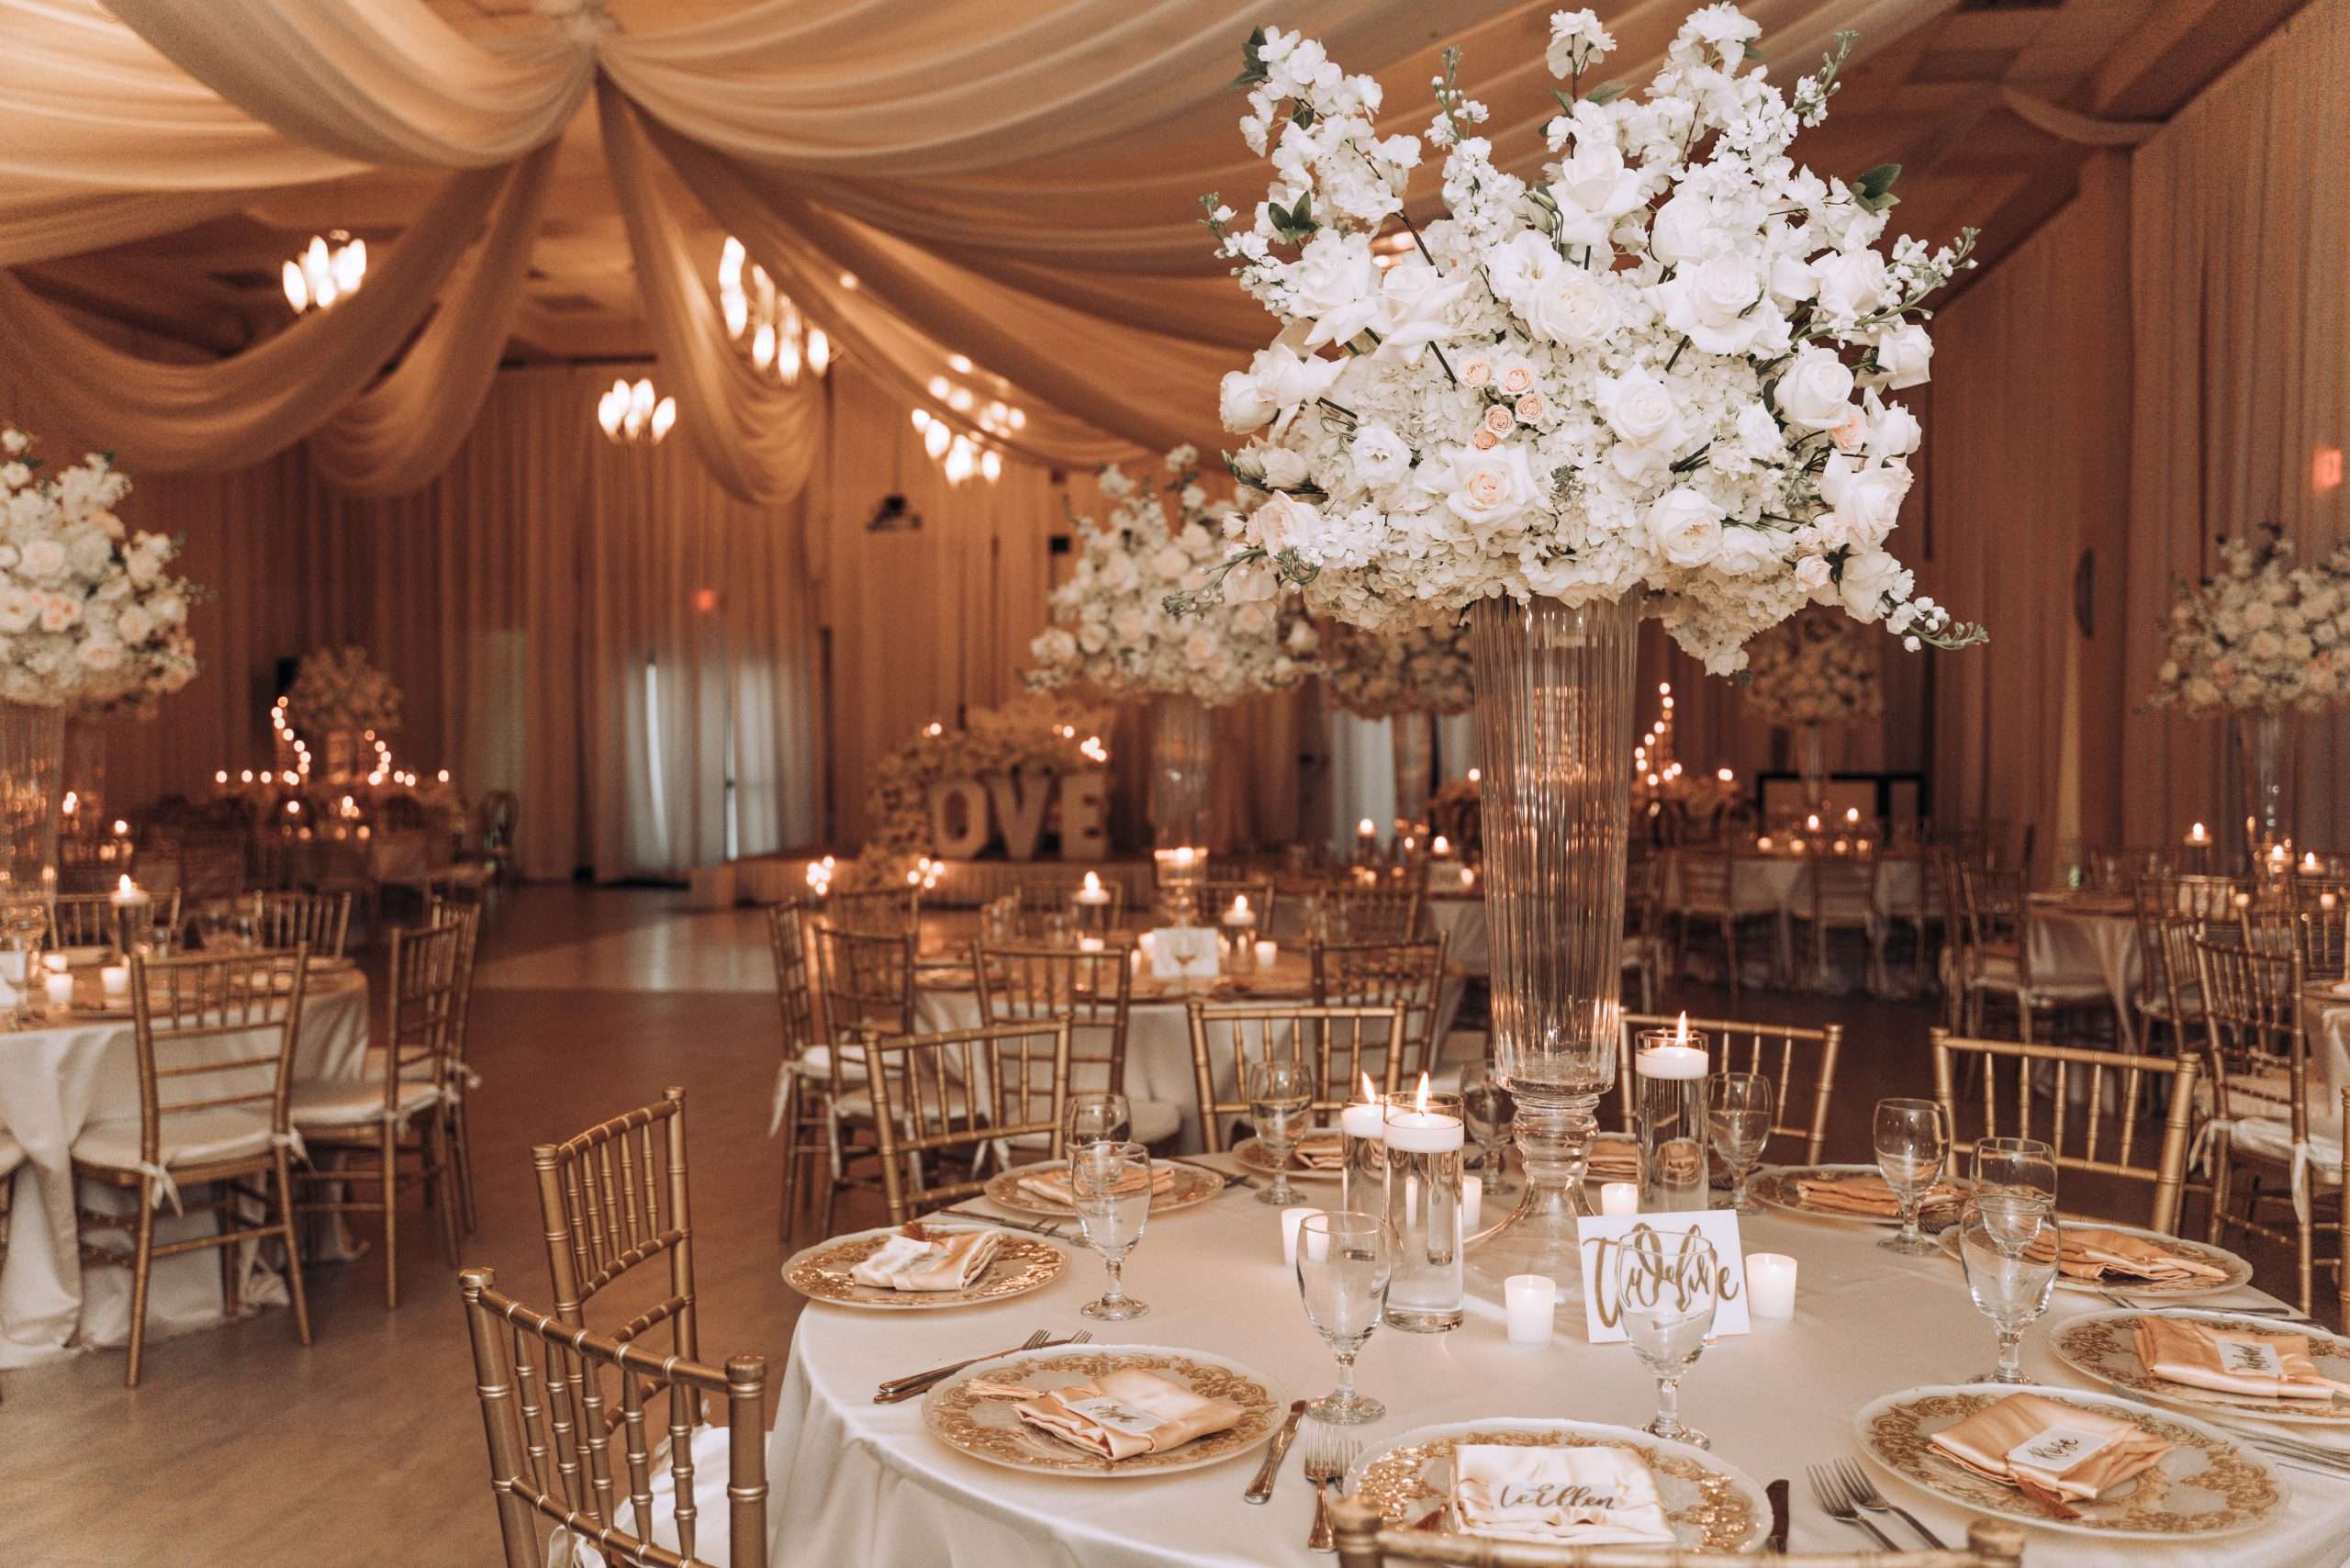 A white and gold wedding reception with candles and flowers.